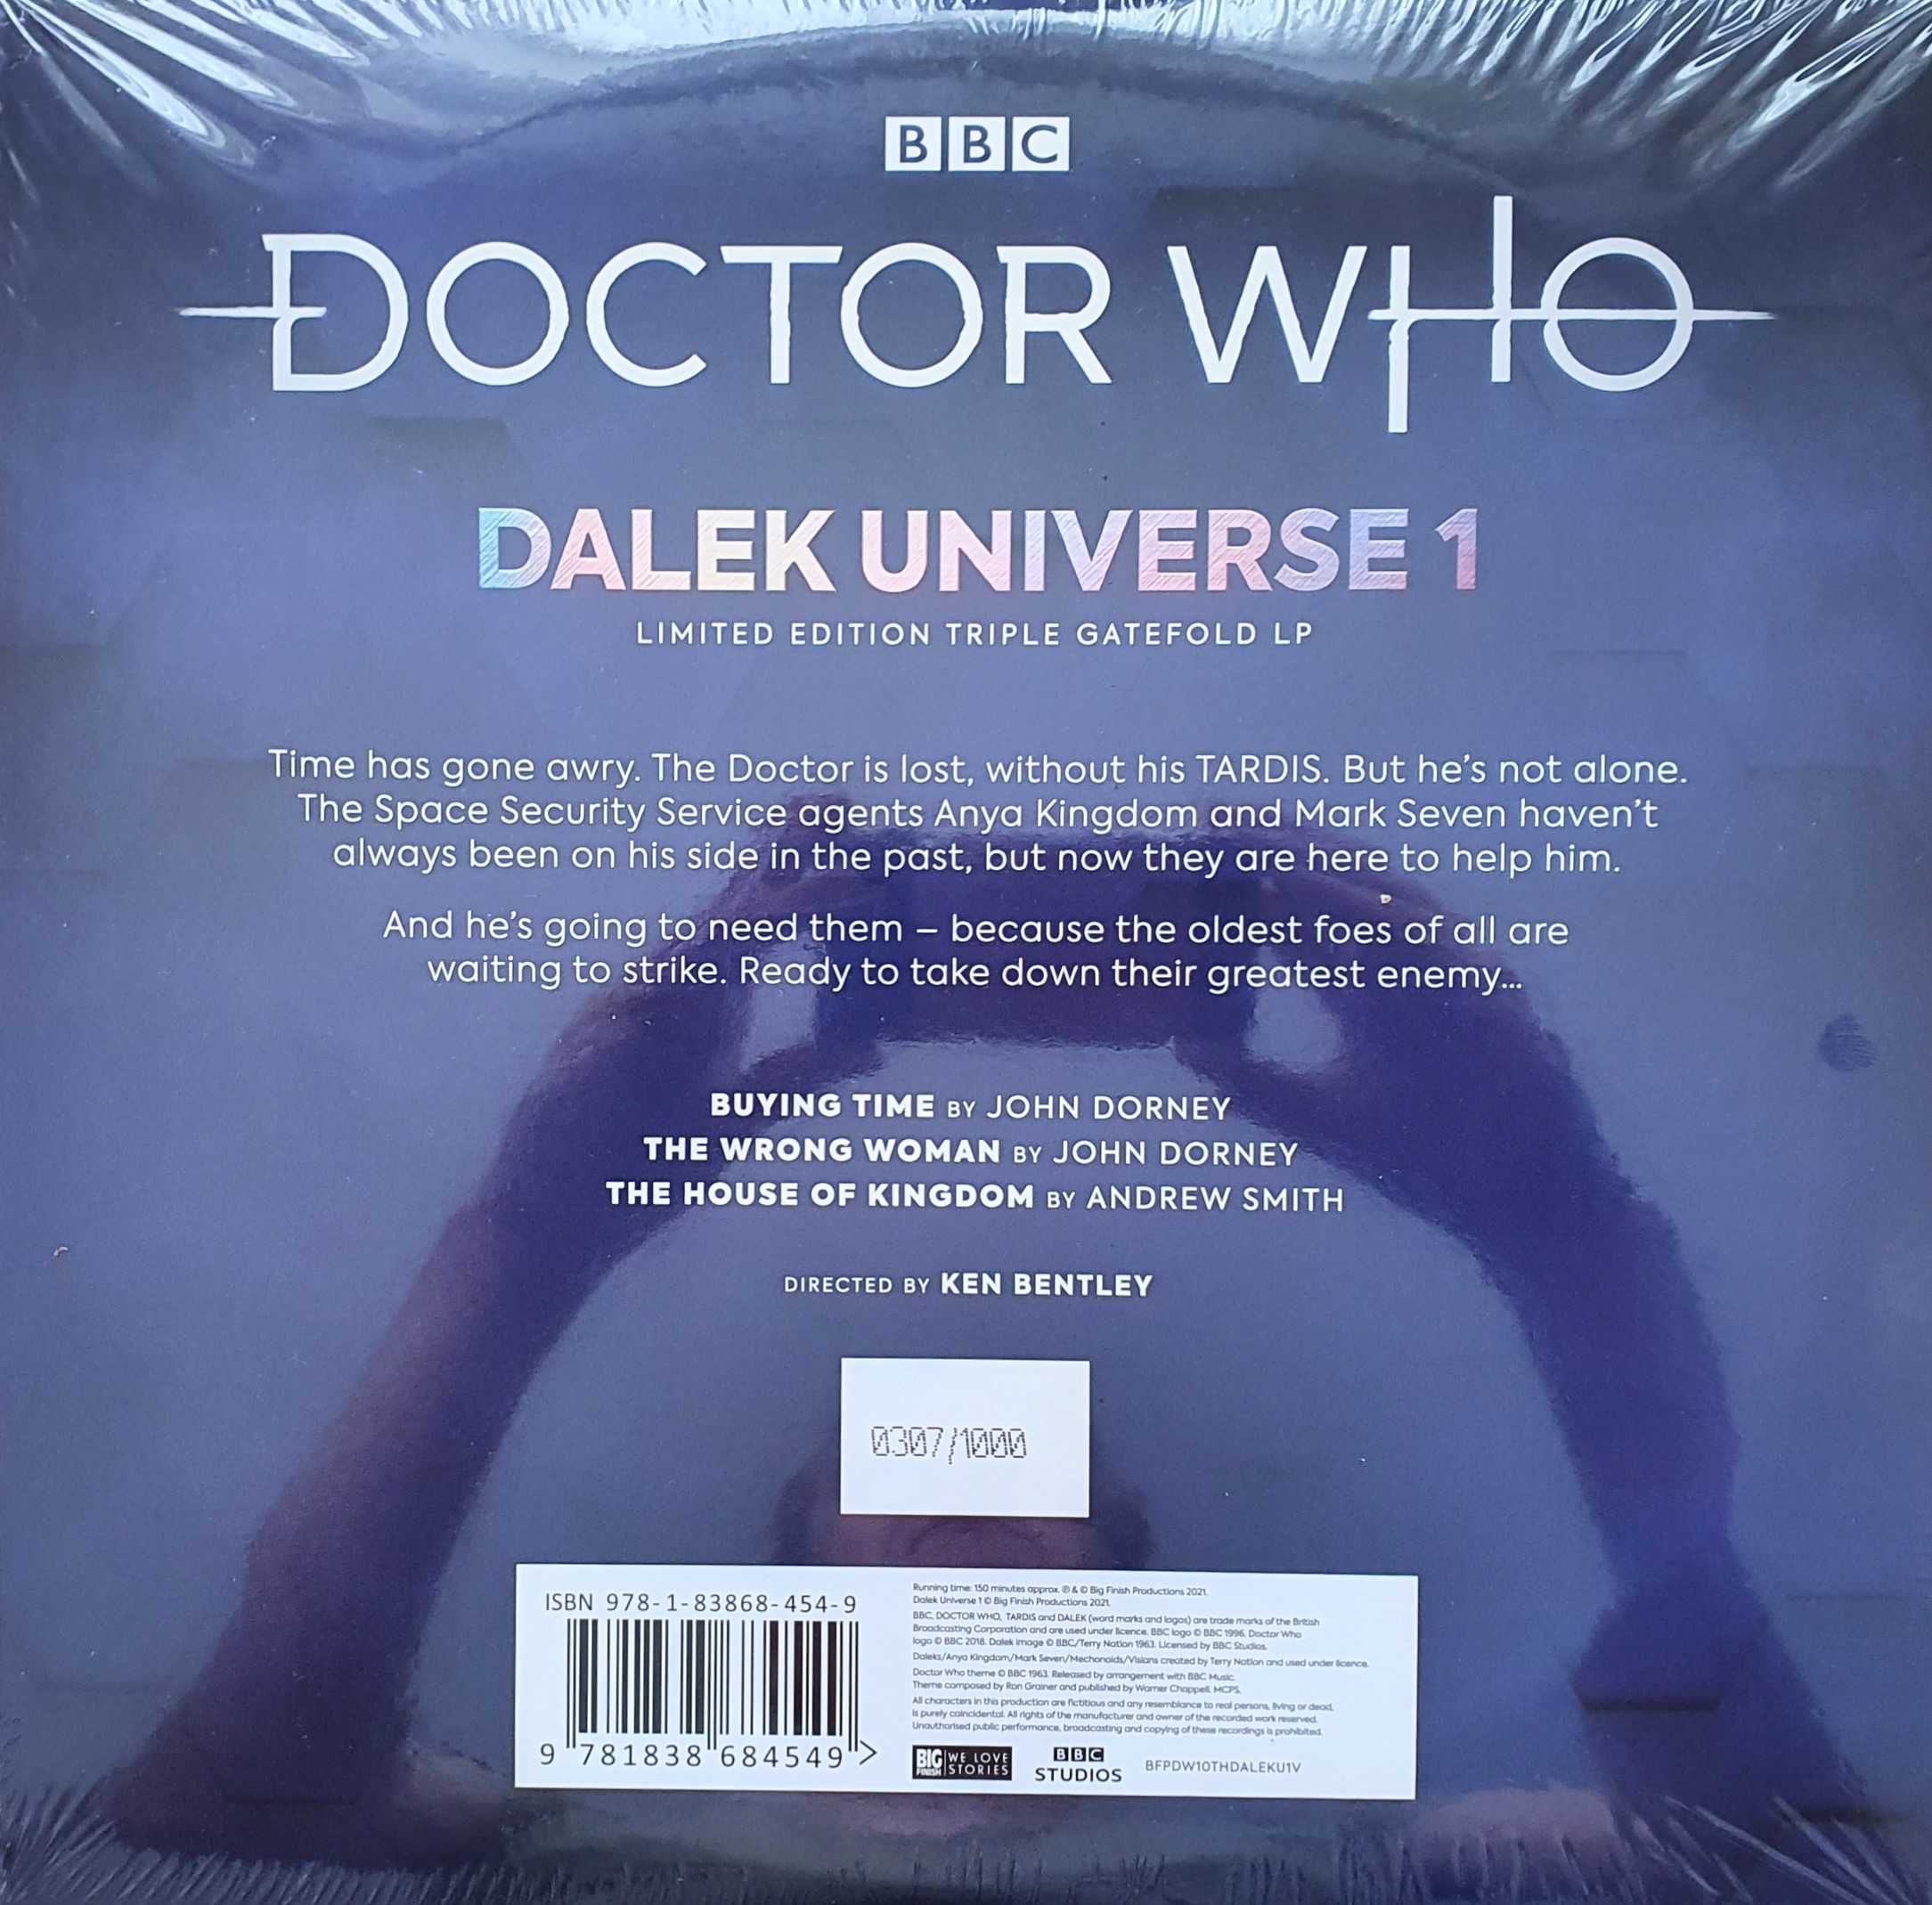 Picture of BFPDW10THDALEKU1V Doctor Who - Dalek universe 1 by artist John Dorney / Andrew Smith from the BBC records and Tapes library